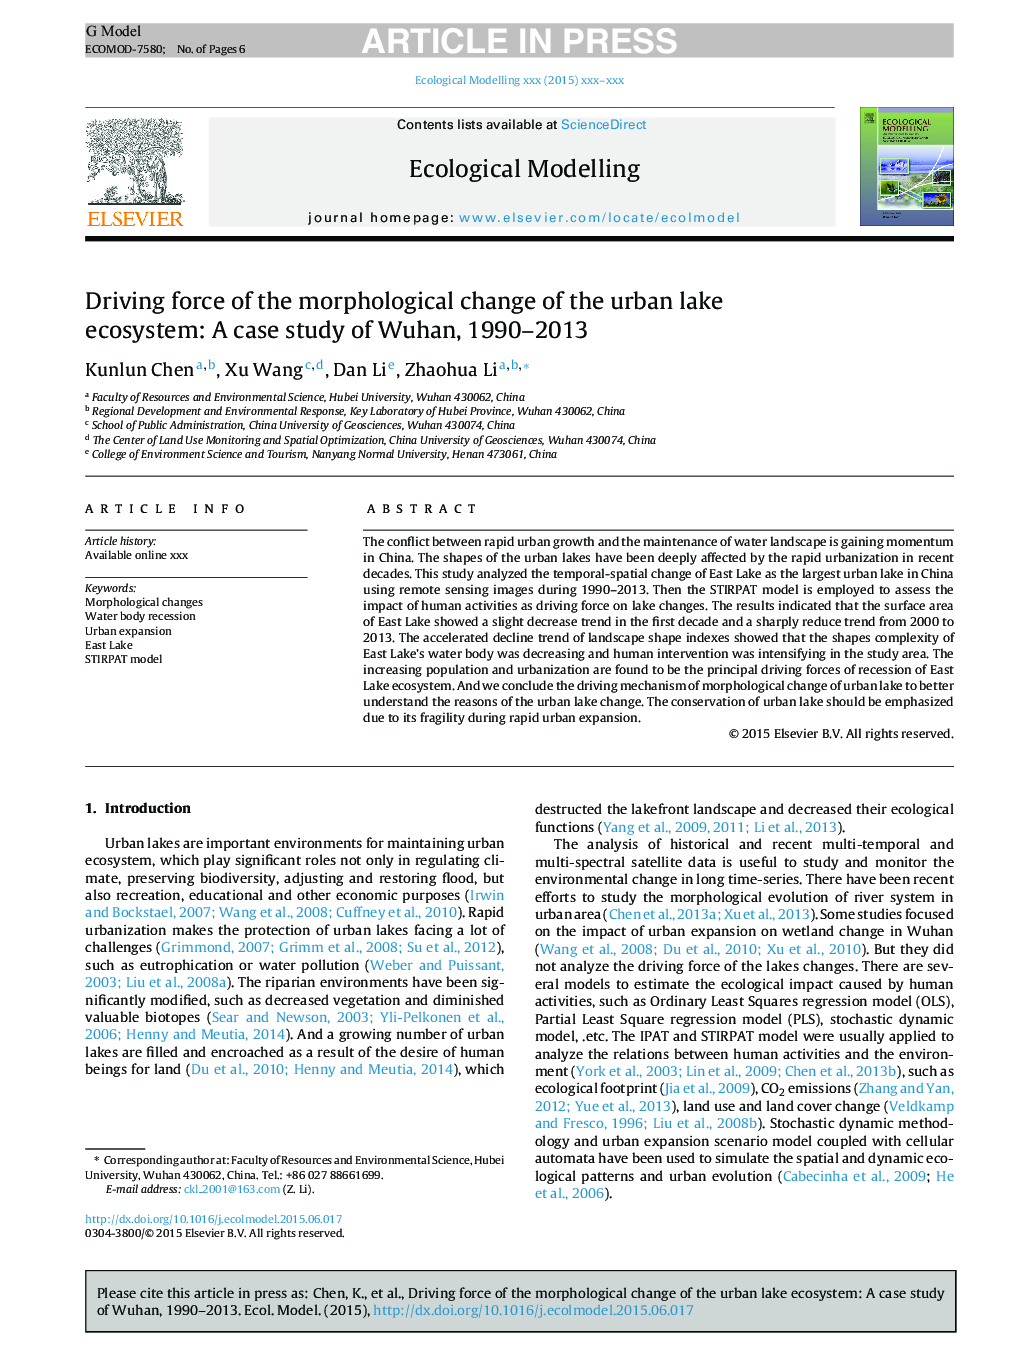 Driving force of the morphological change of the urban lake ecosystem: A case study of Wuhan, 1990-2013